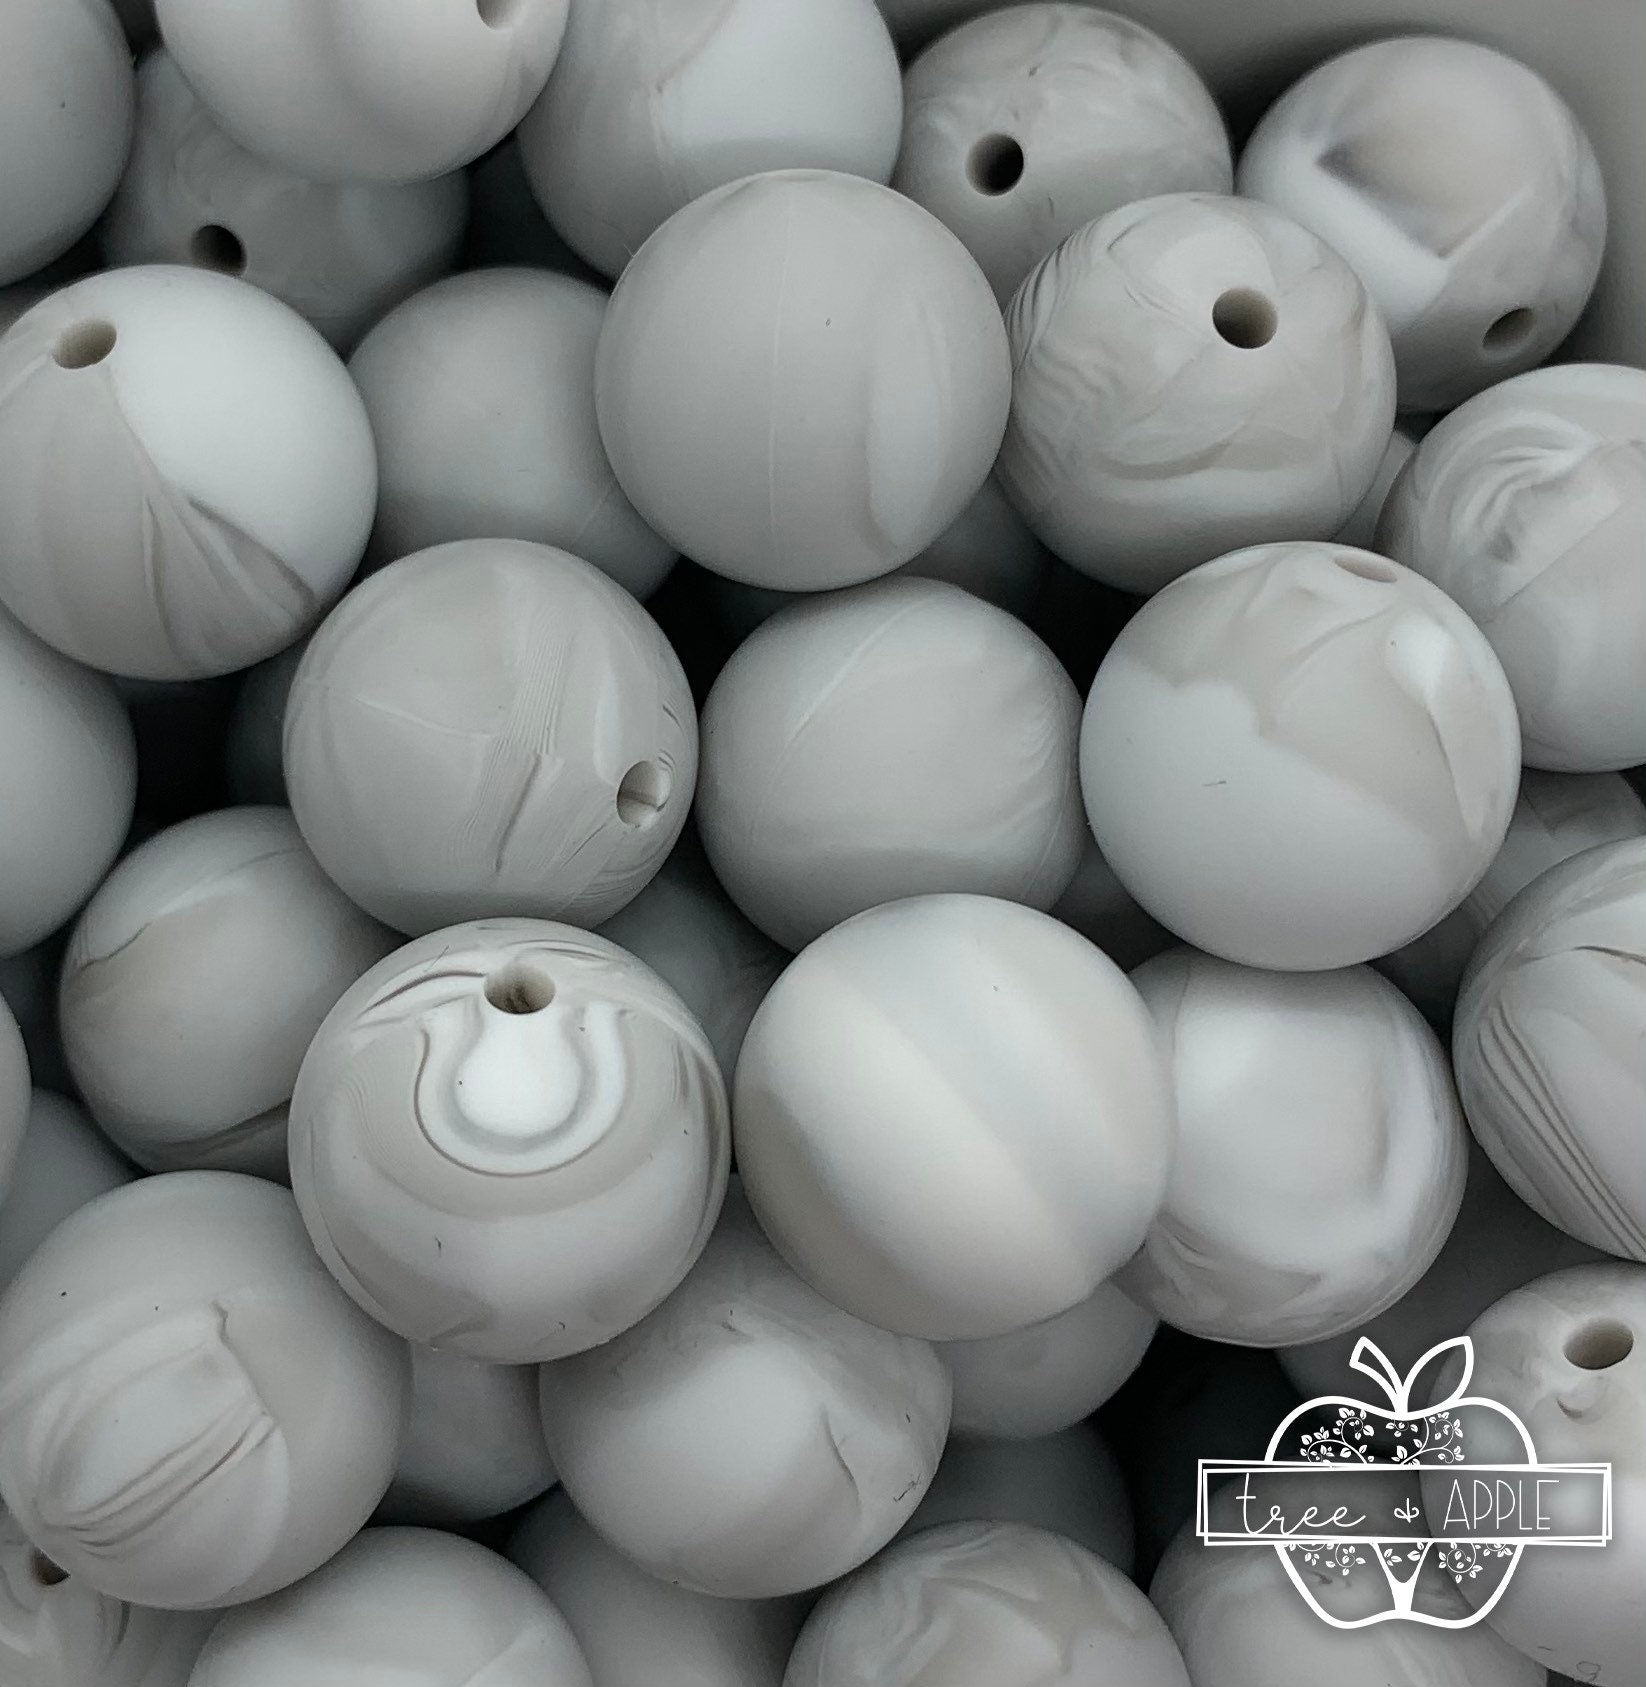 15mm Grey Marble Swirl Silicone Beads, Gray Round Silicone Beads, Beads  Wholesale